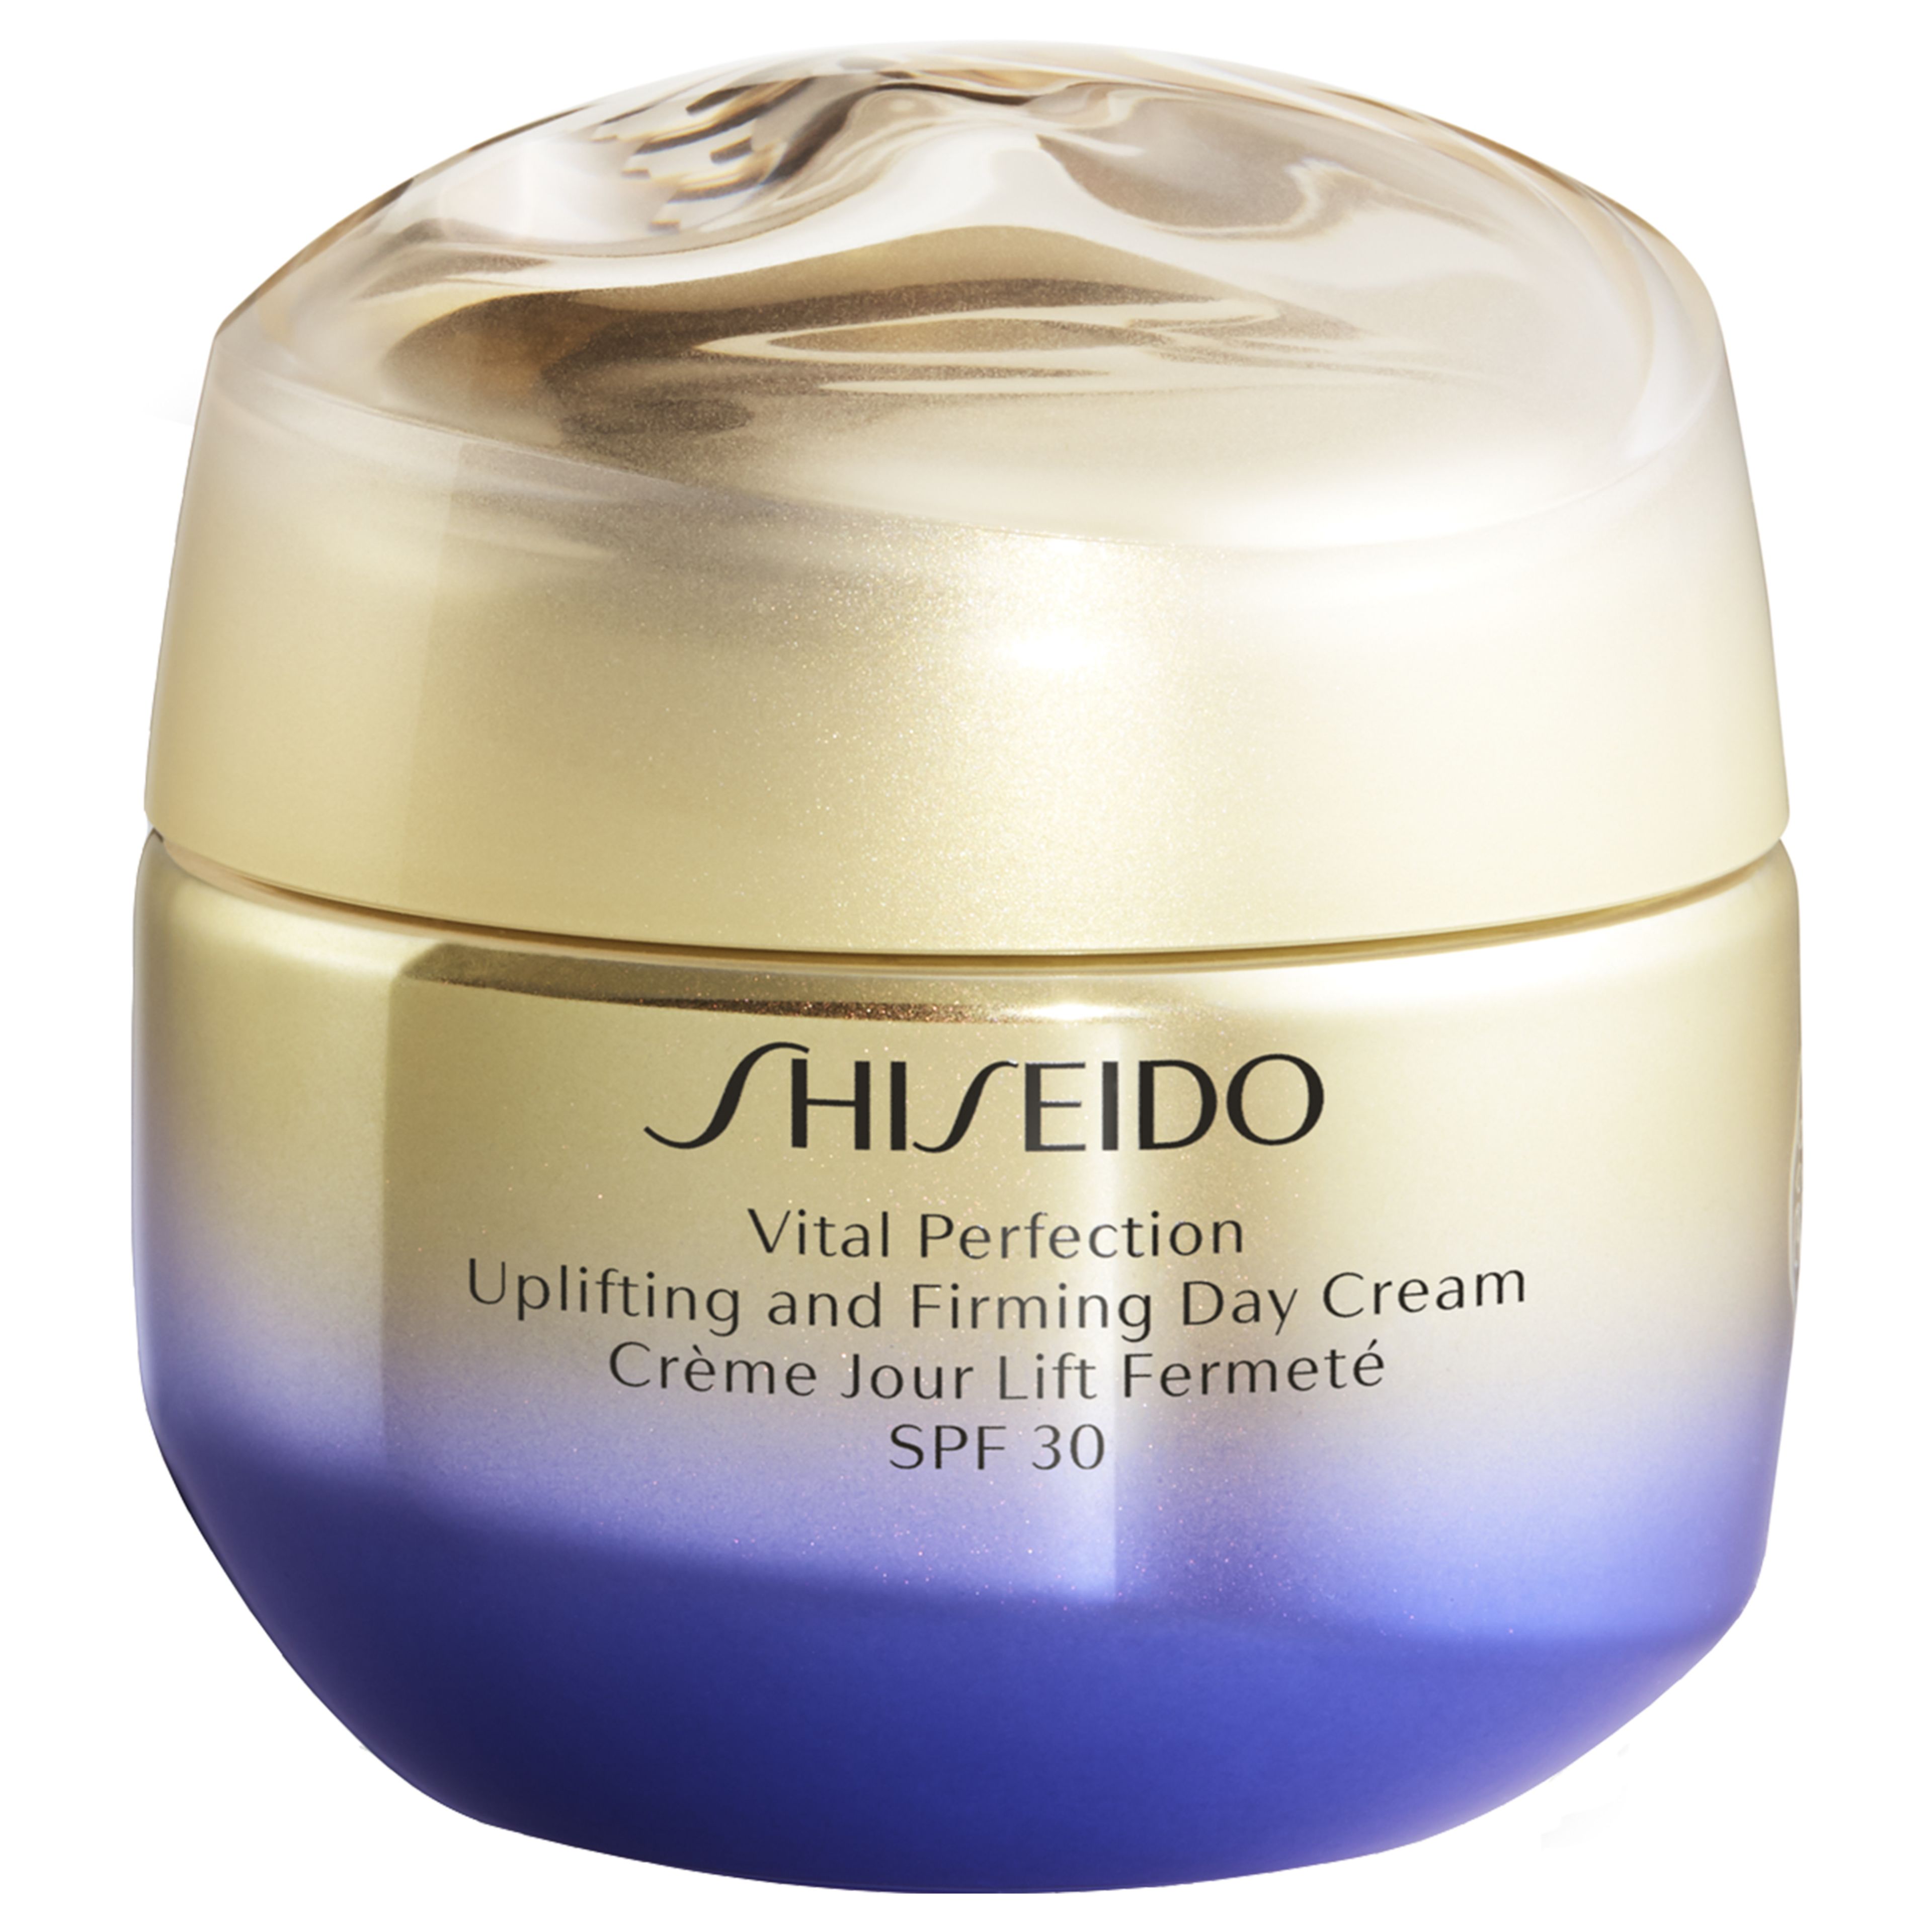 Shiseido Uplifting And Firming Day Cream 1